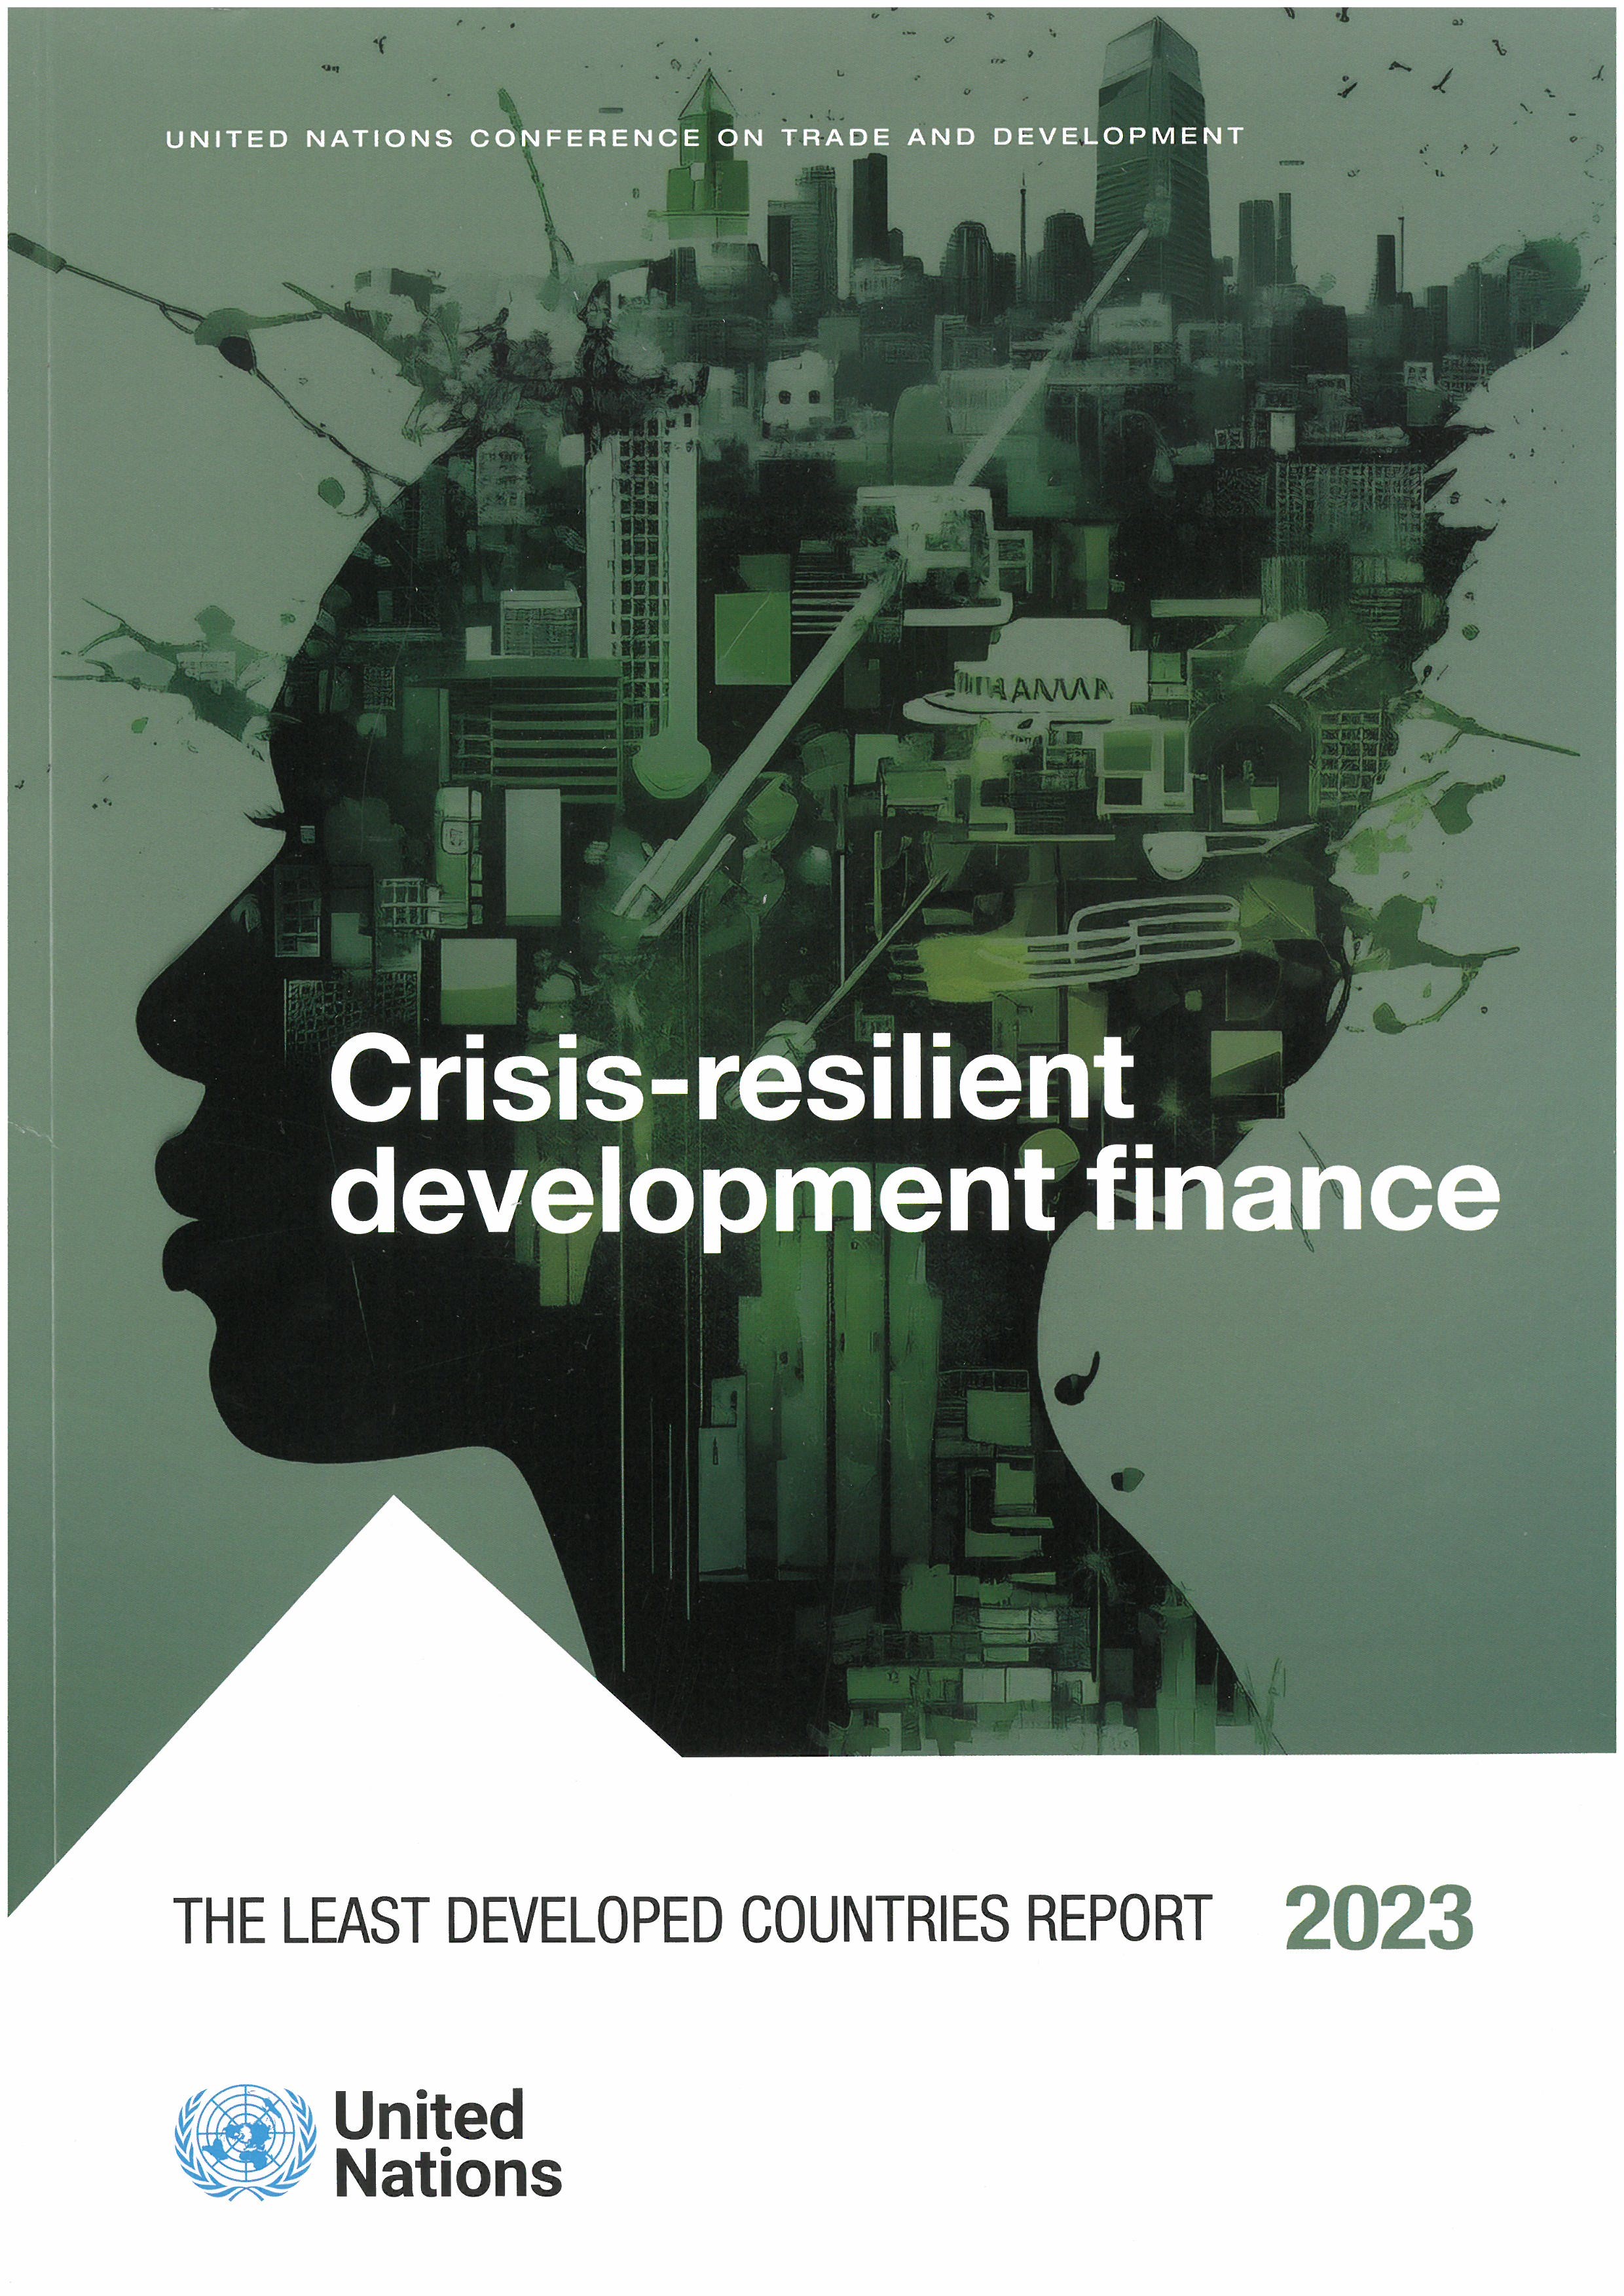 The least developed countries report. 2023, Crisis-resilient development finance